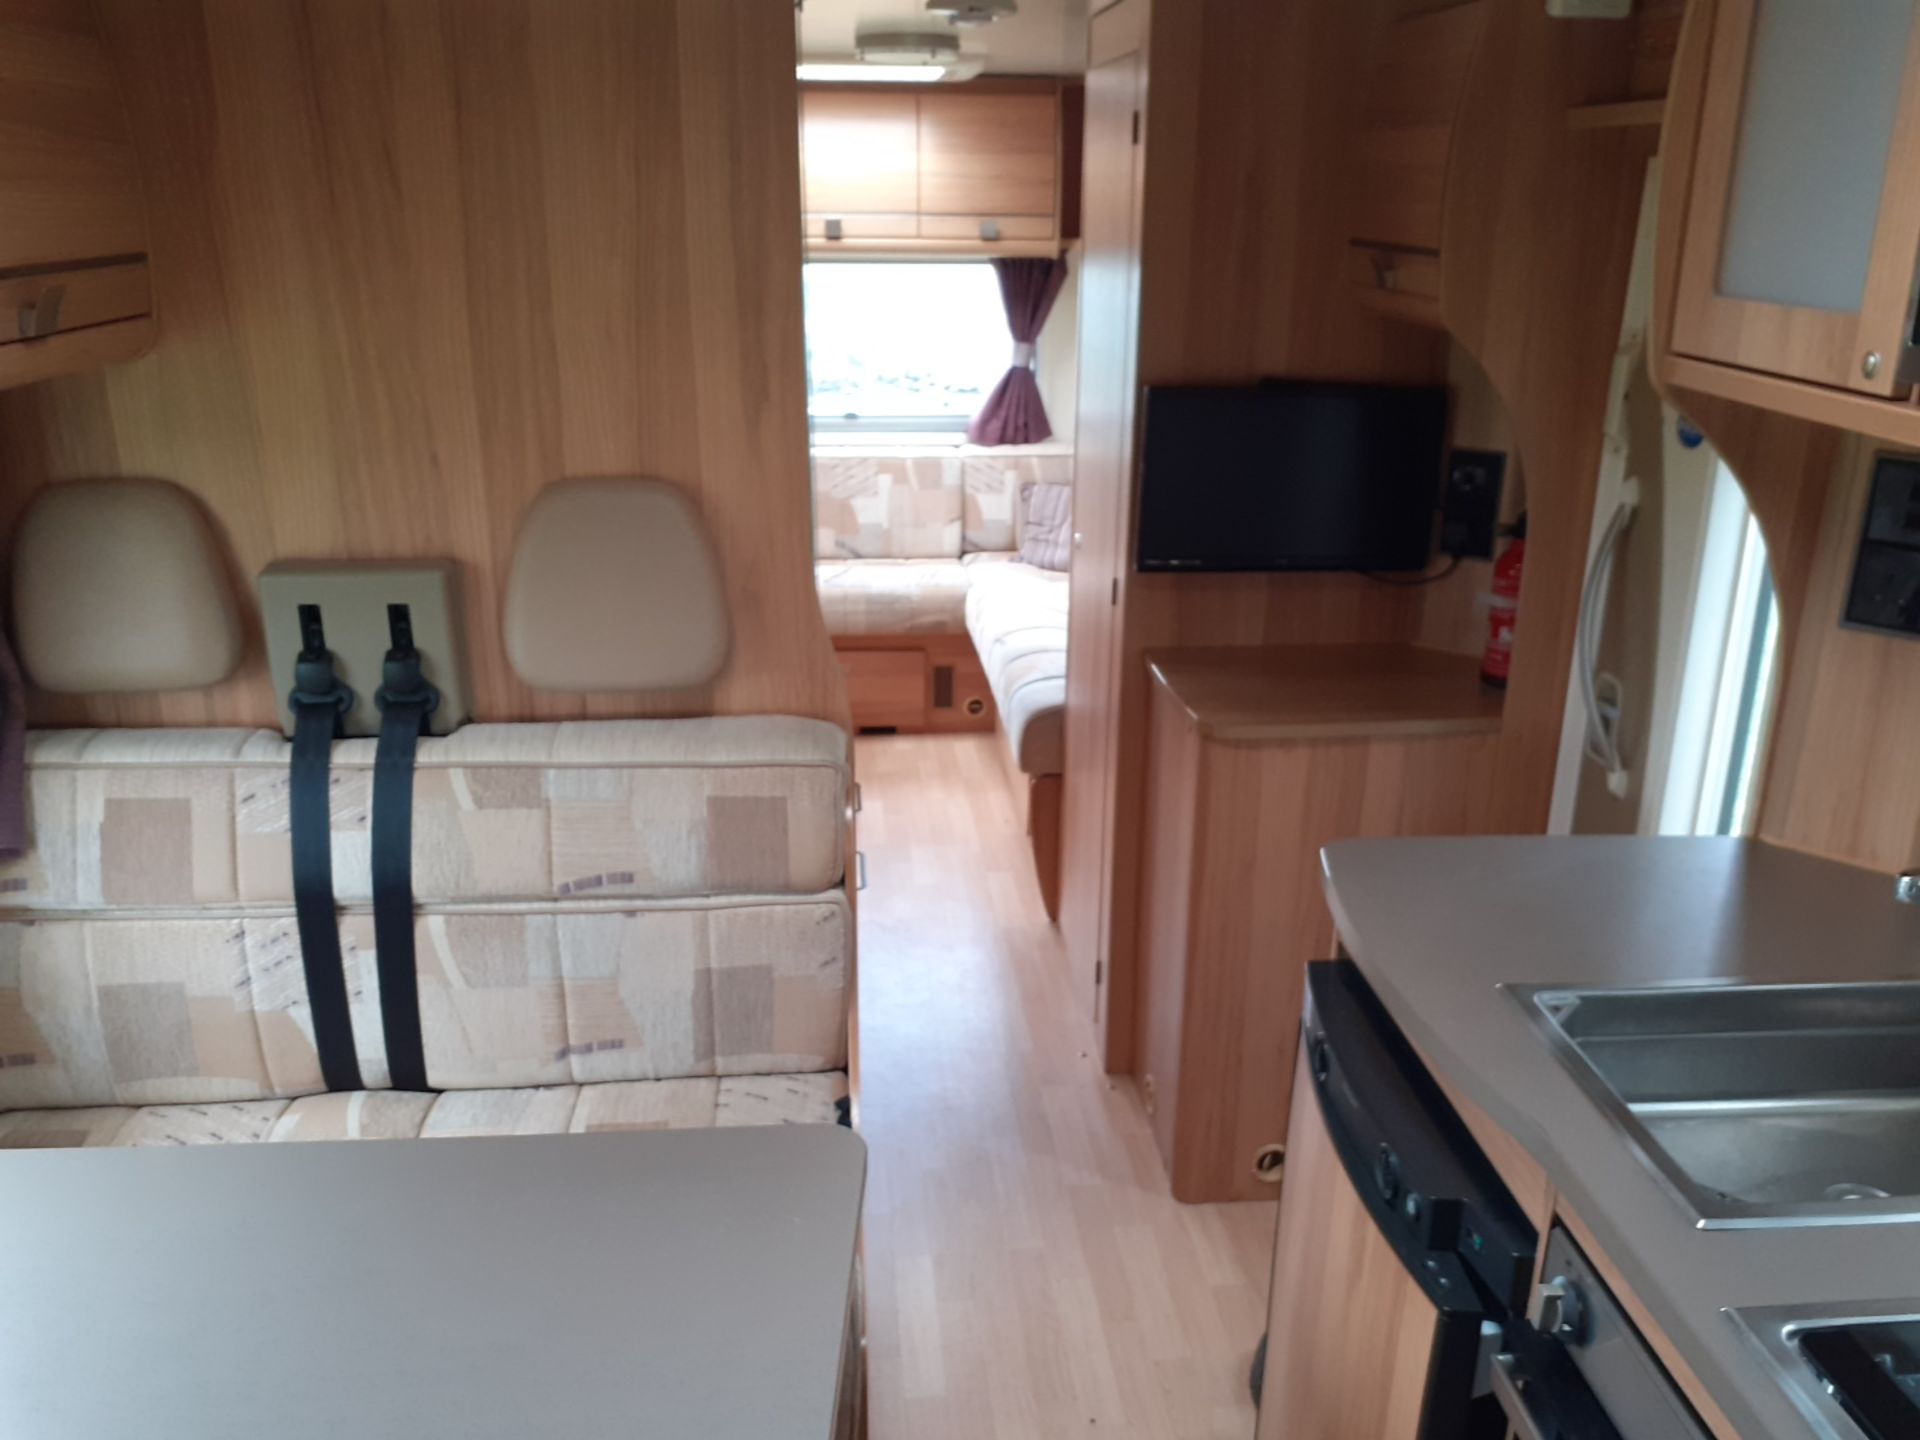 2012 BAILEY APPROACH 760 SE LUXURY 6 BERTH MOTORHOME £10K OF EXTRAS, 30,000 MILES FROM NEW - Image 22 of 31